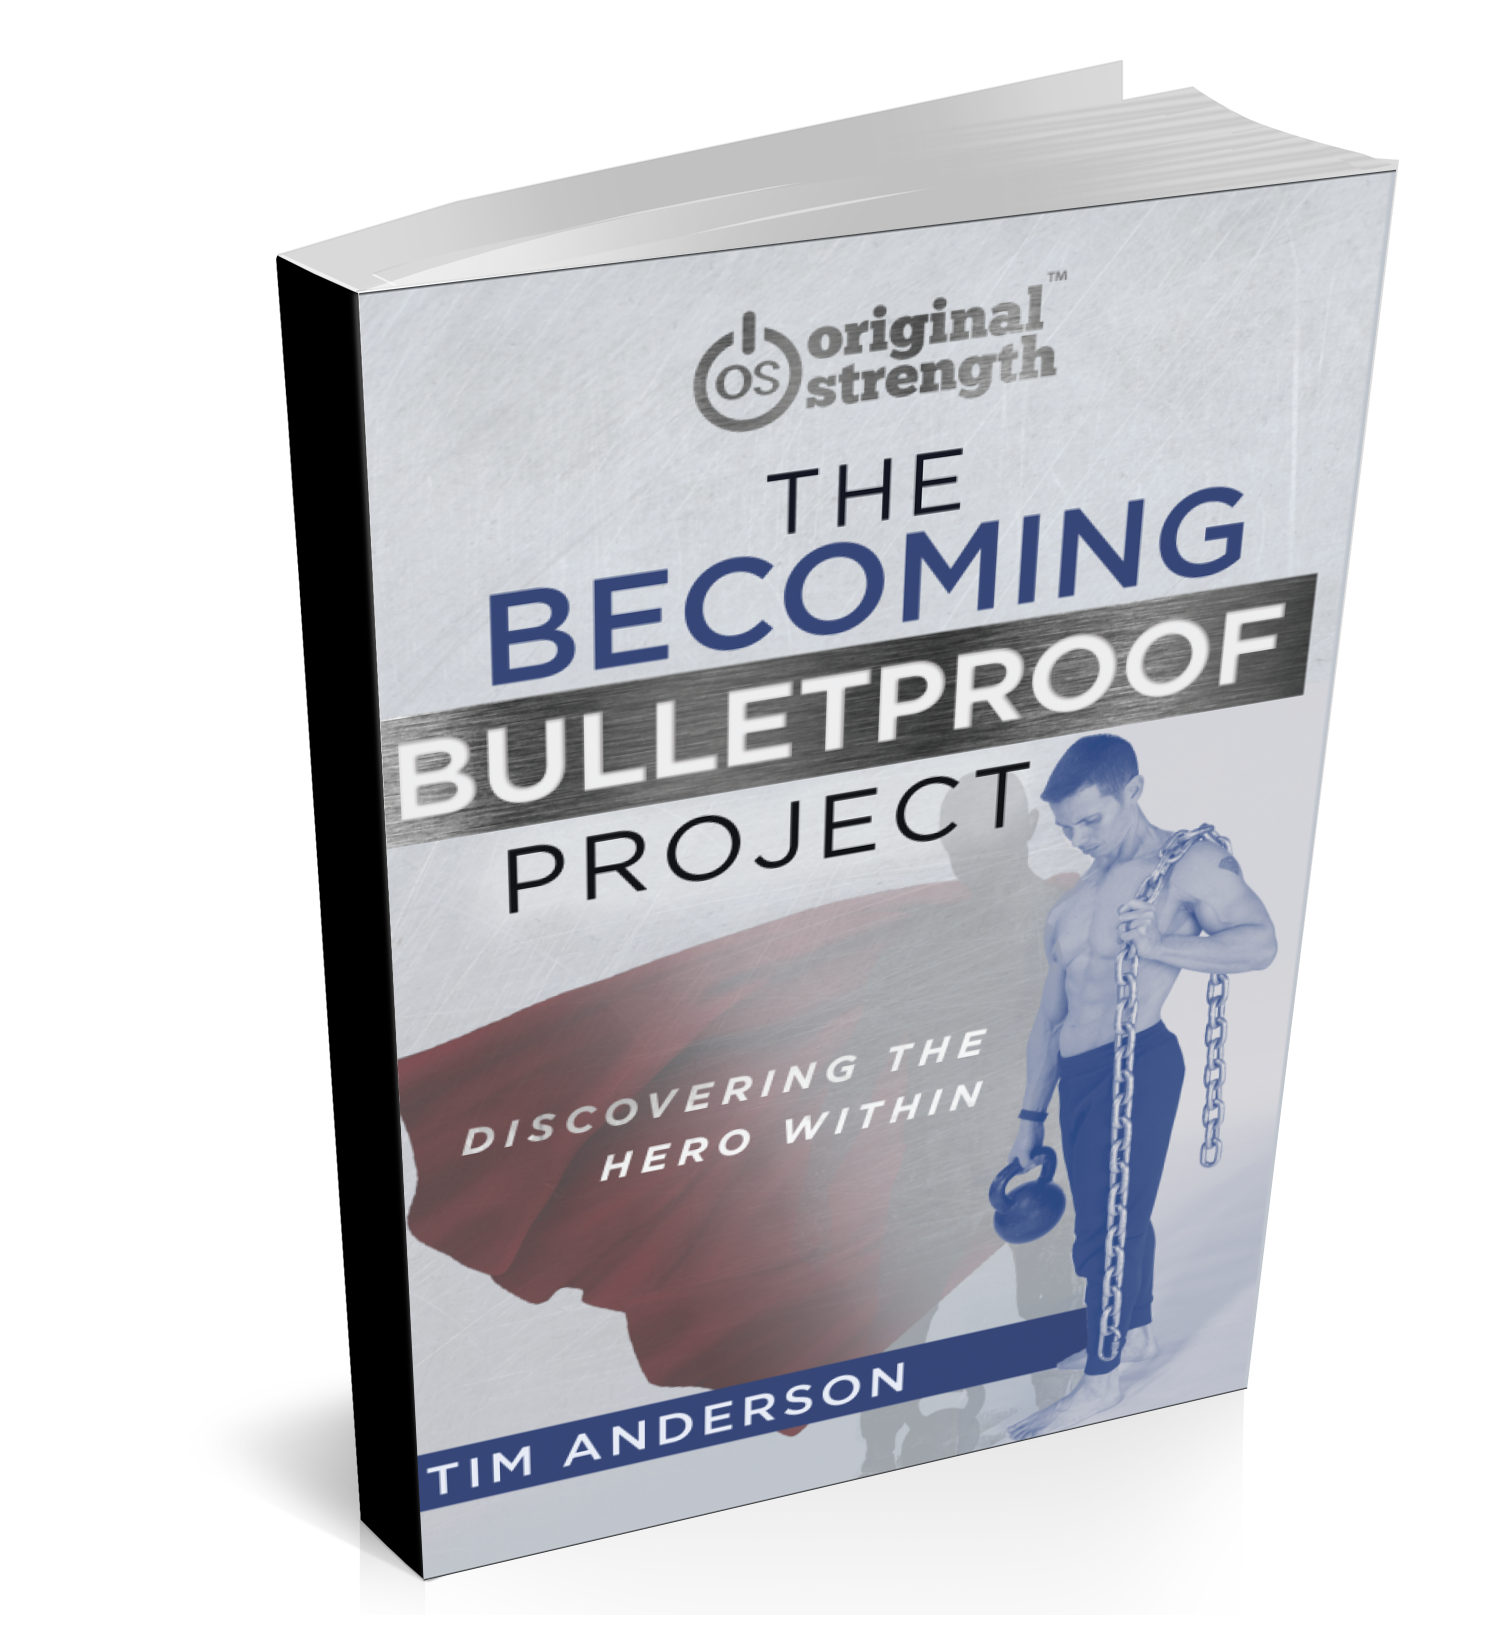 The Becoming Bulletproof Project